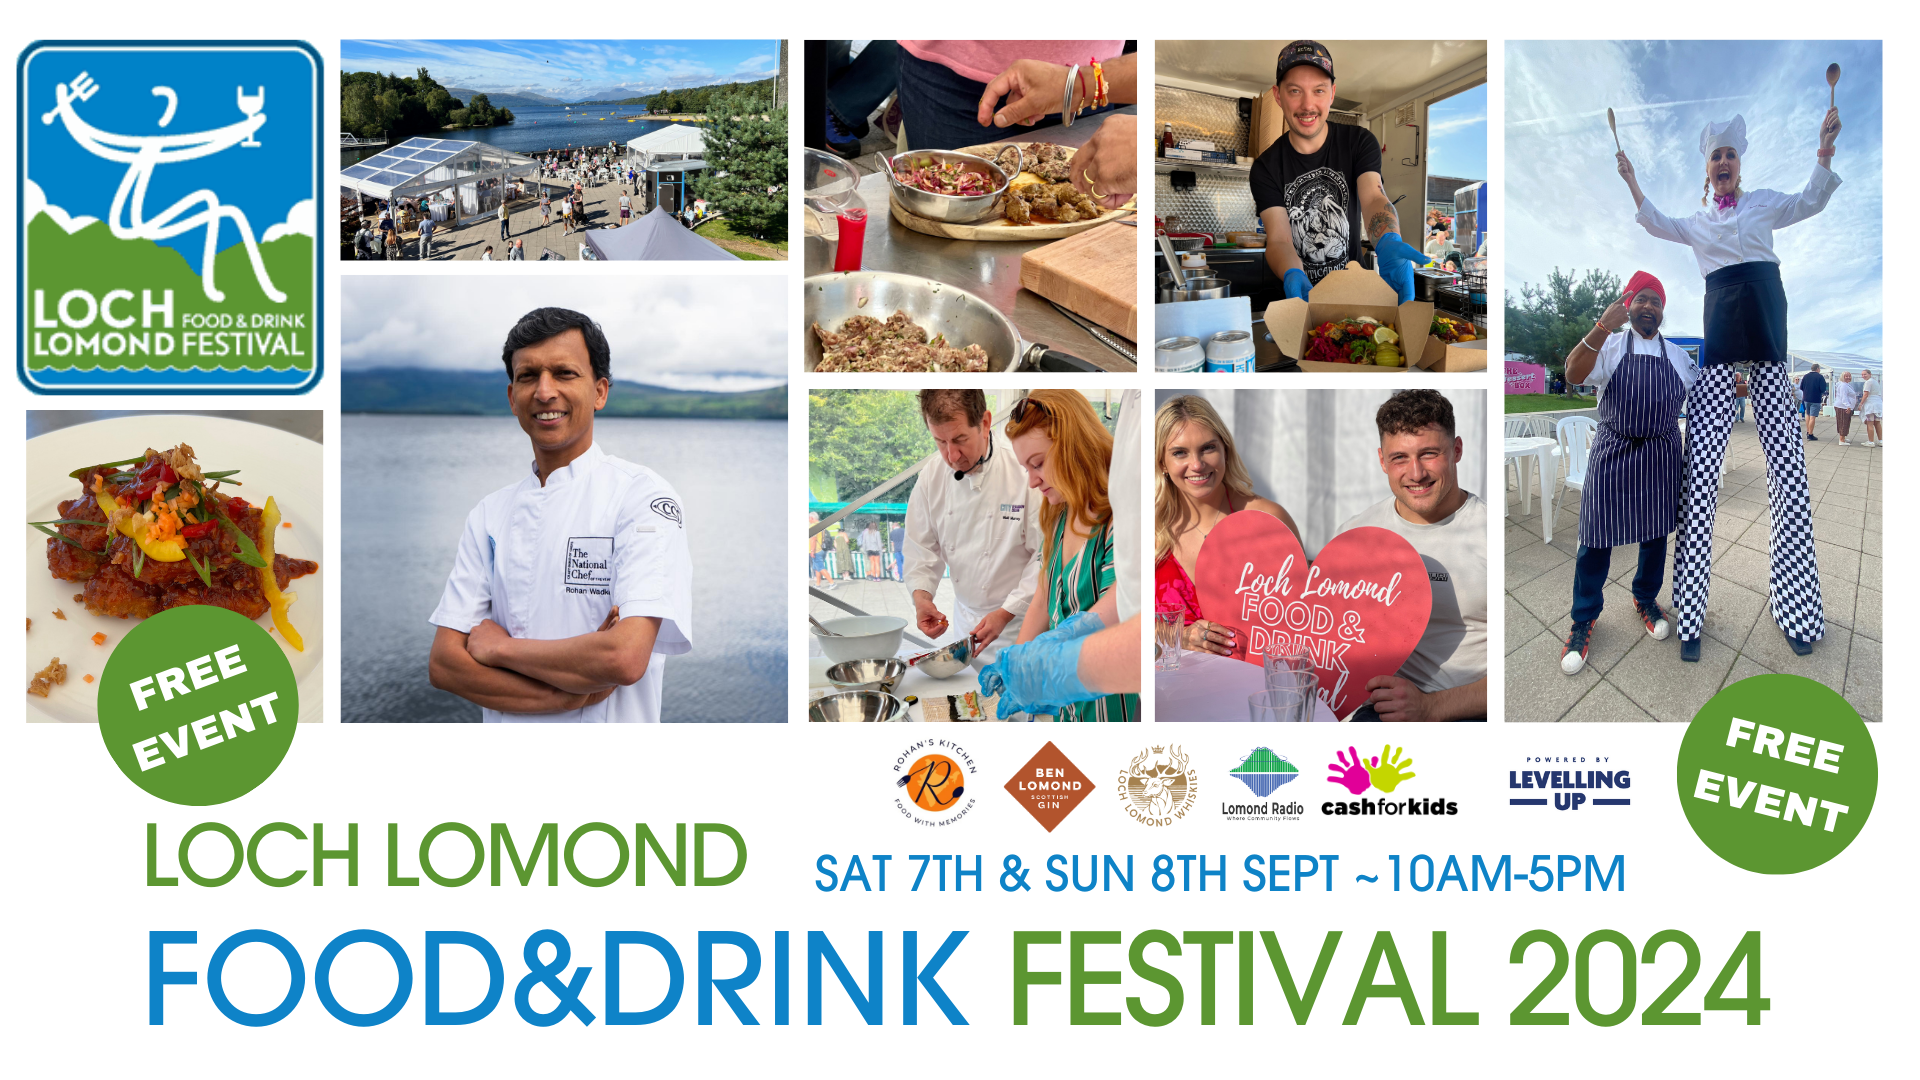 Loch Lomond Food & Drink Festival is COMING back IN 2024 - 7th & 8th Sept